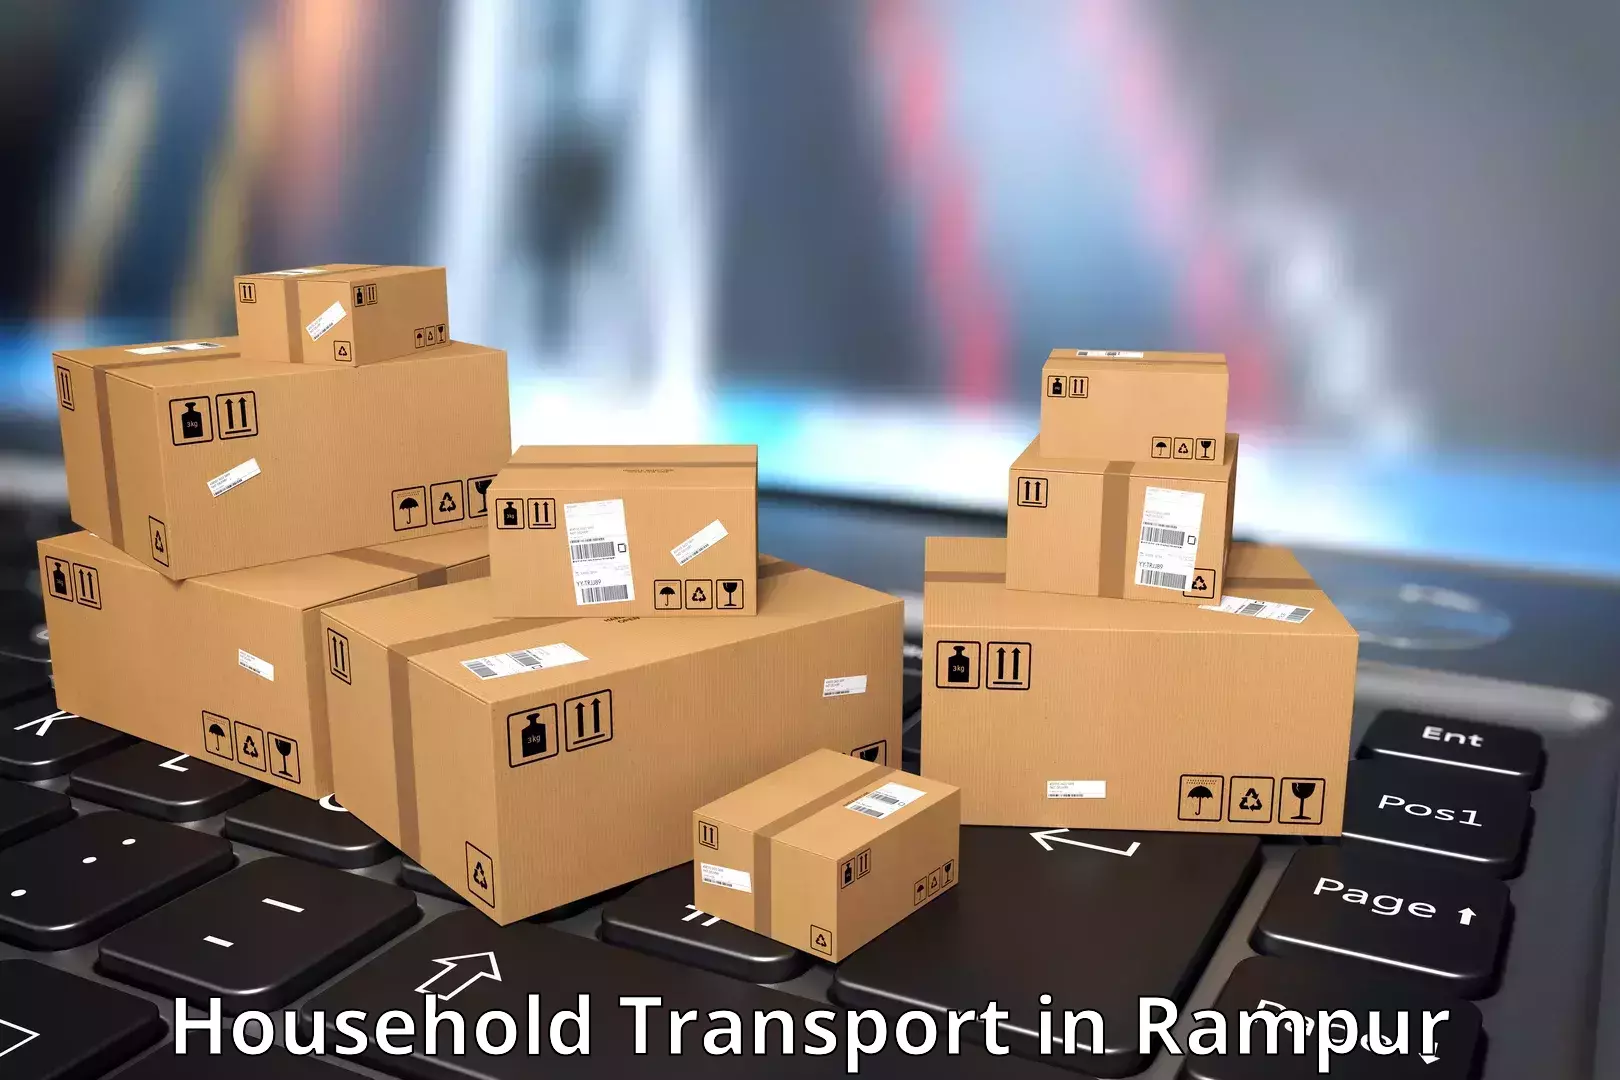 Long-distance household transport in Rampur